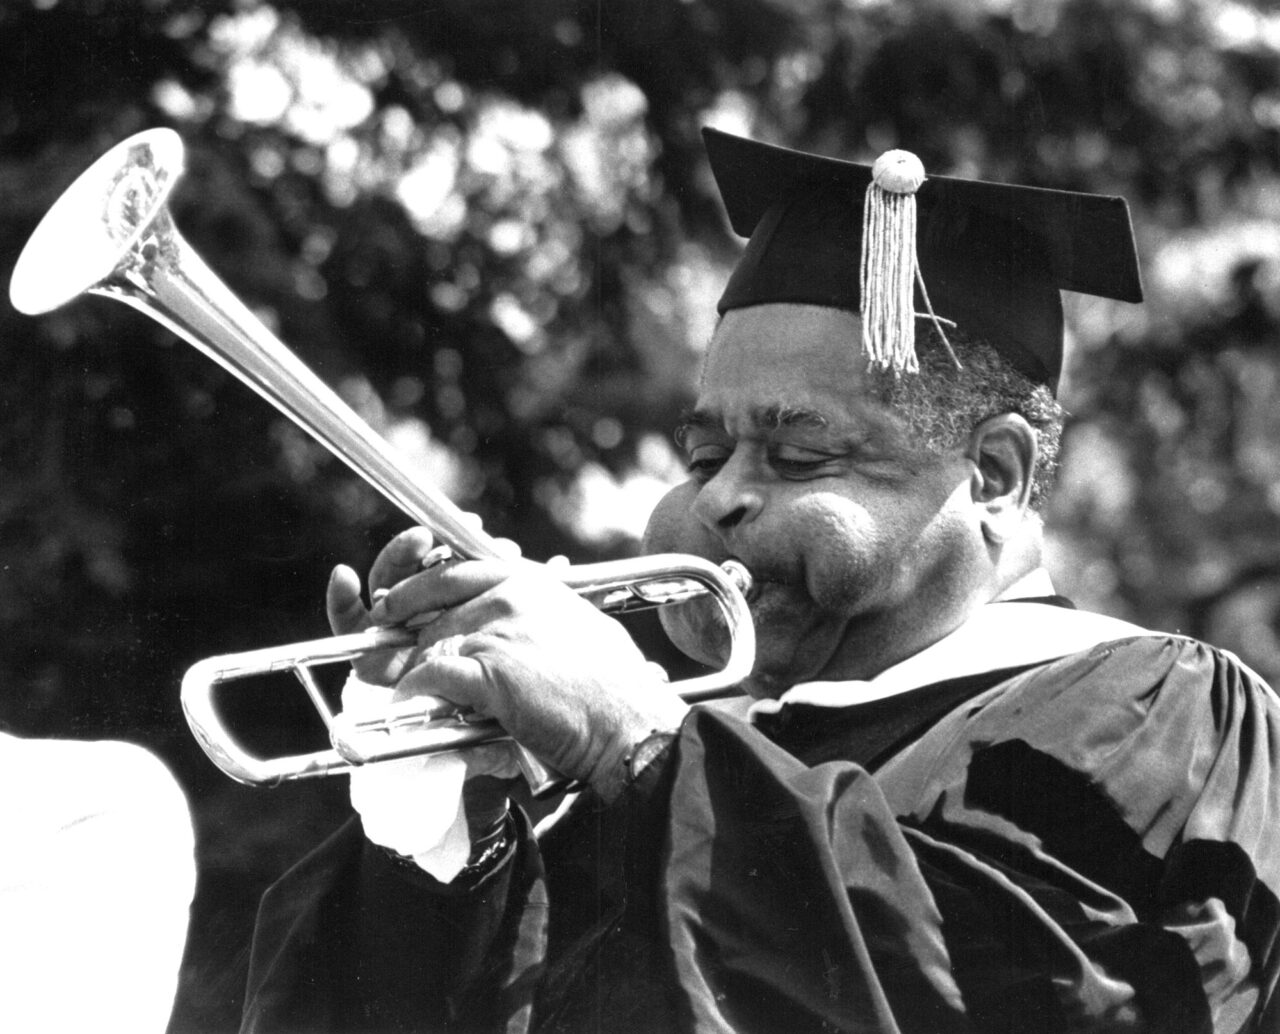 A man wearing a graduation cap and gown plays the trumpet.